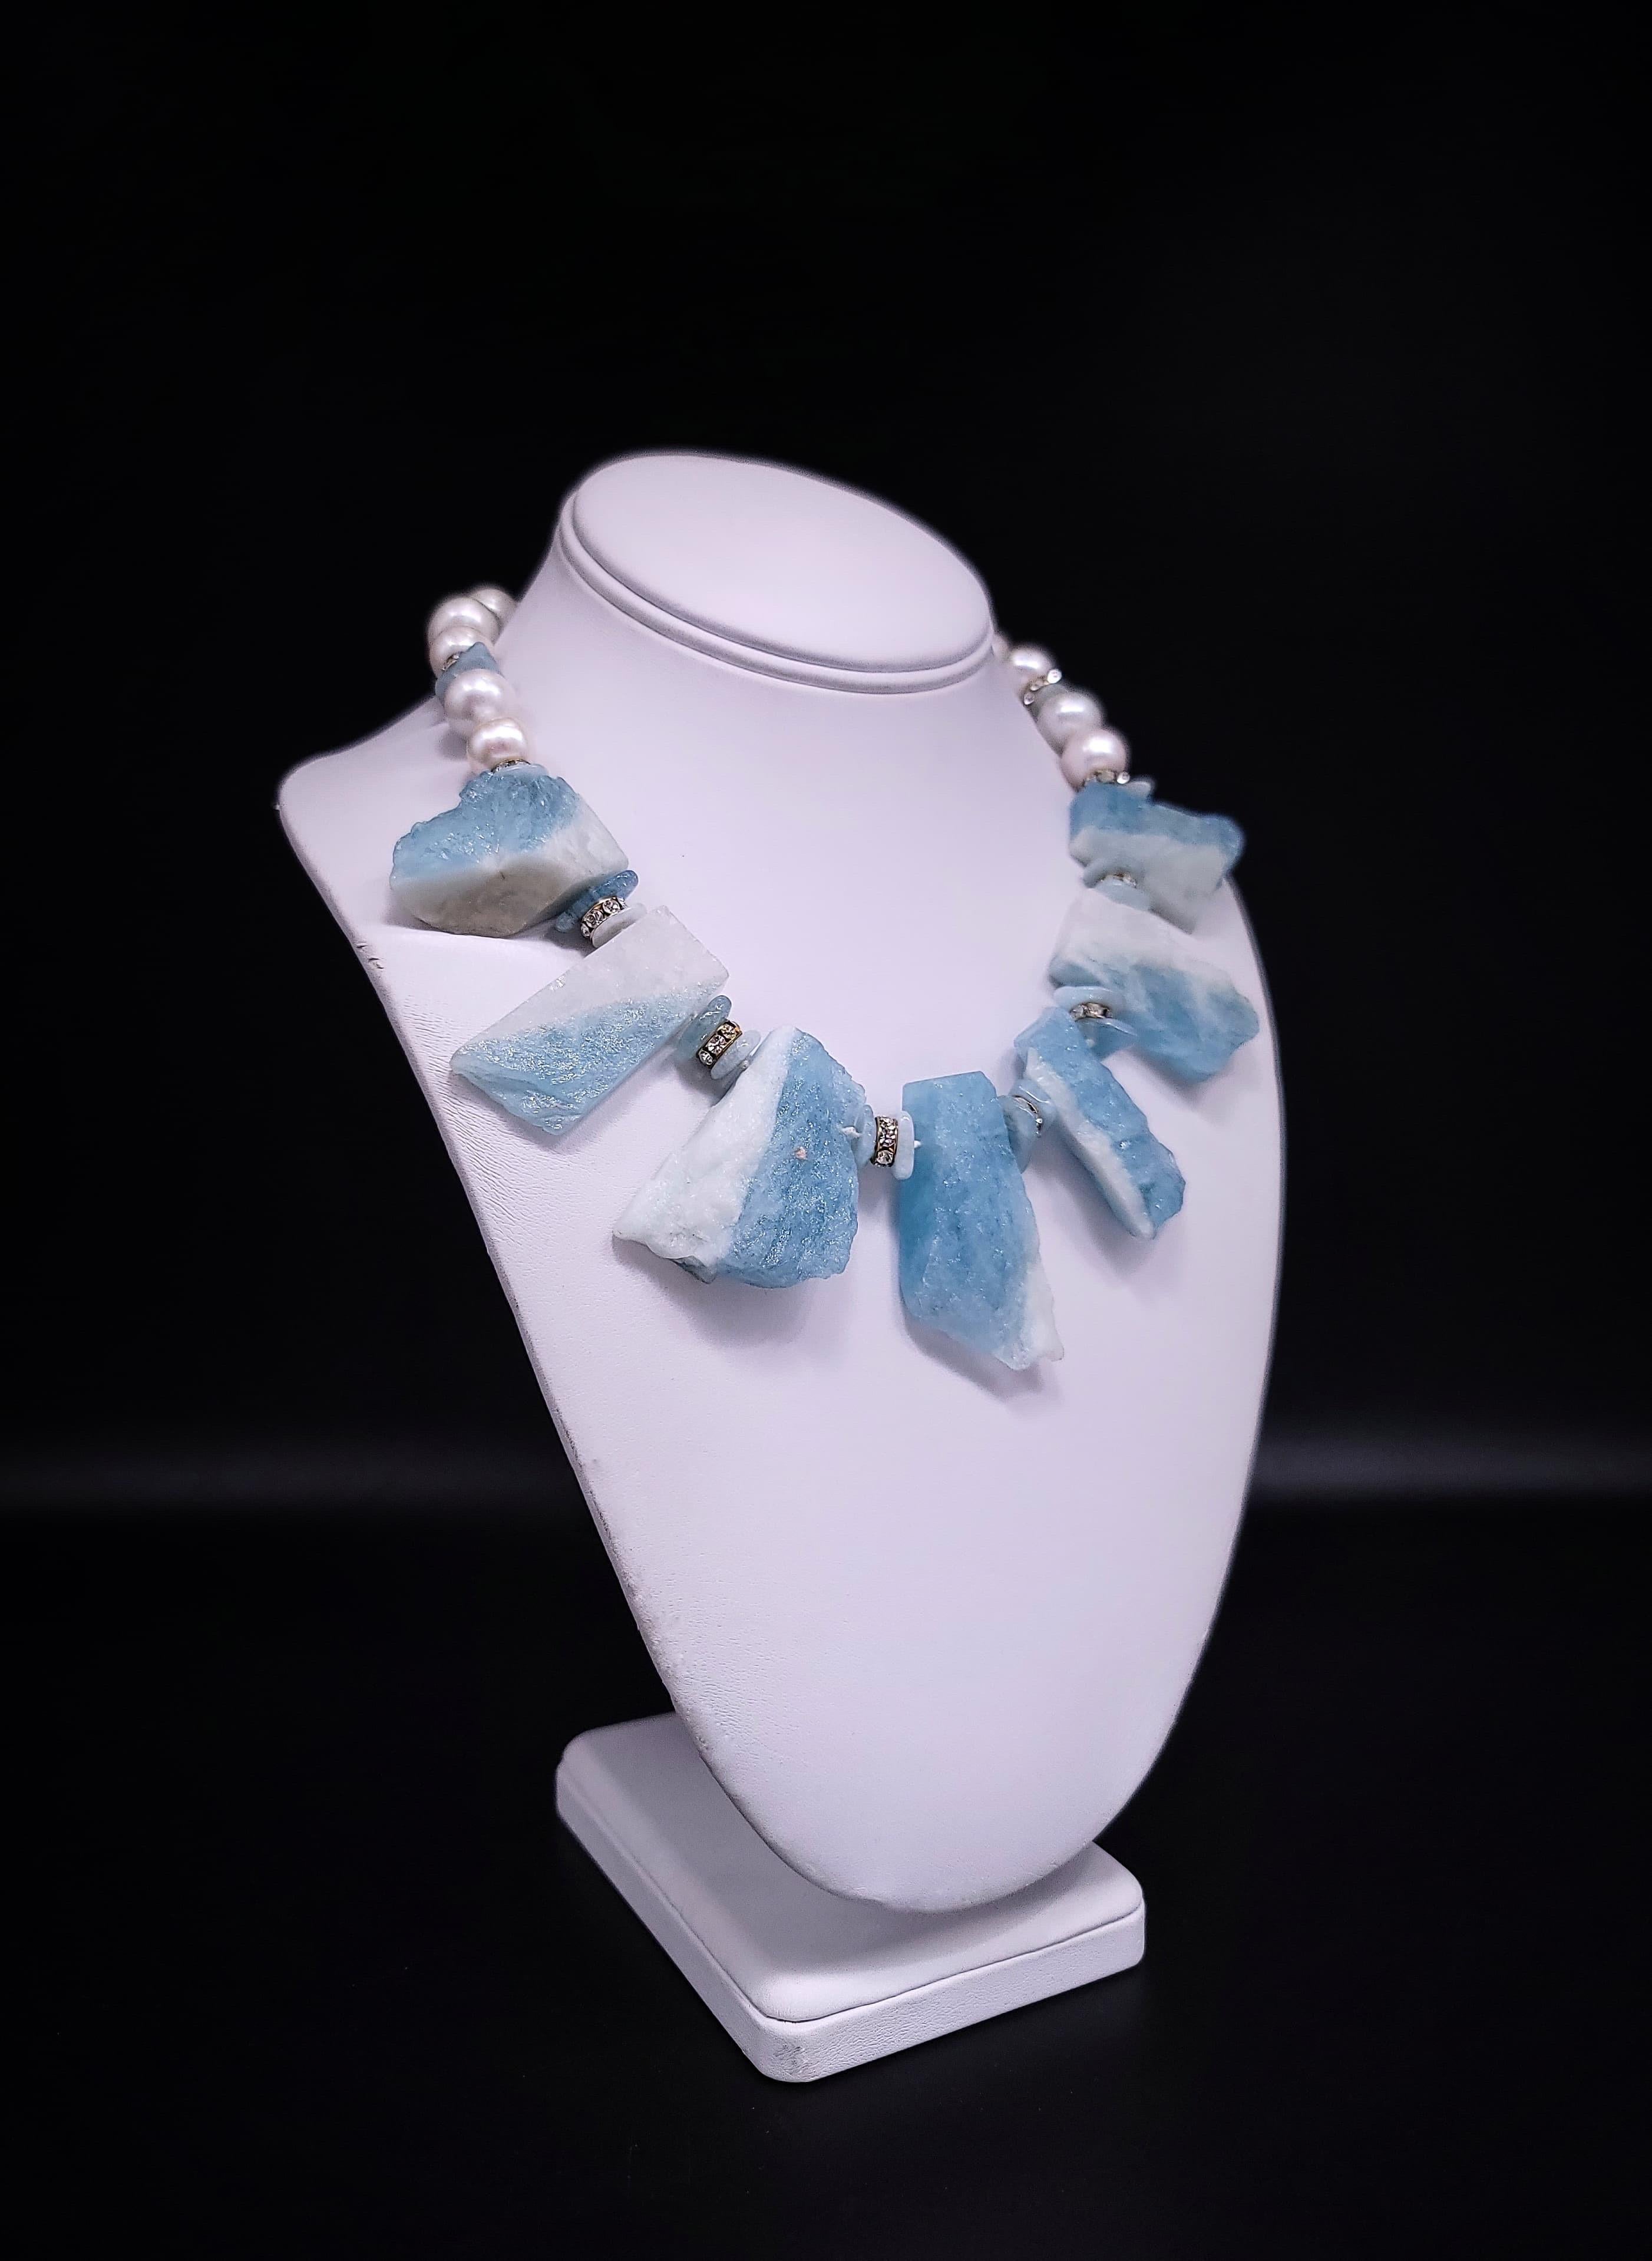 Unique Aquamarine Elegance: Handcrafted Statement Necklace

Prepare to be mesmerized by the singular beauty of this one-of-a-kind necklace, meticulously crafted to captivate the senses. Seven rough-cut flat-back aquamarine chunks steal the